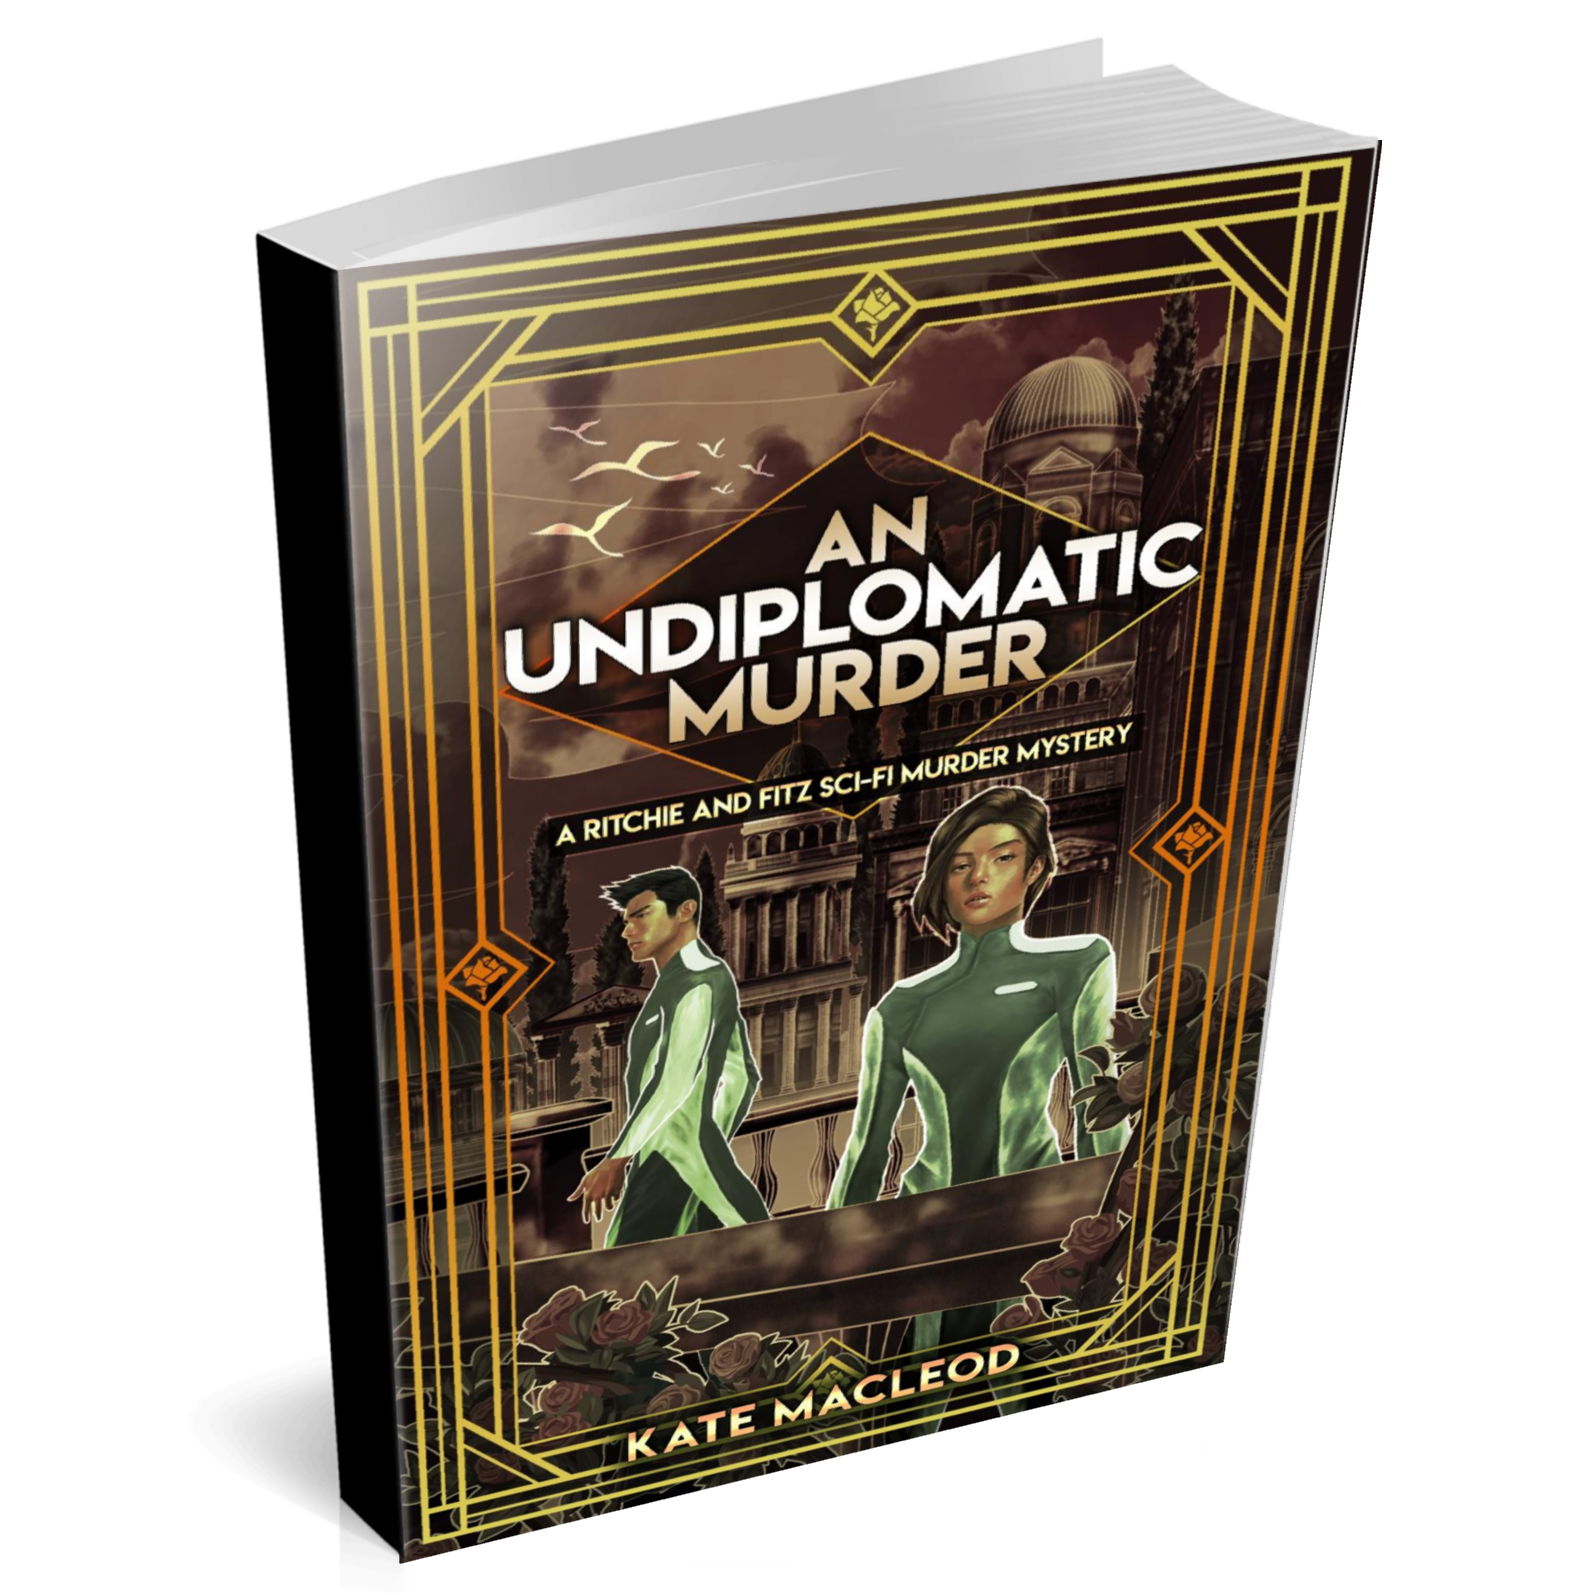 Book cover An Undiplomatic Murder: A Ritchie and Fitz Sci-Fi Murder Mystery young adult novel